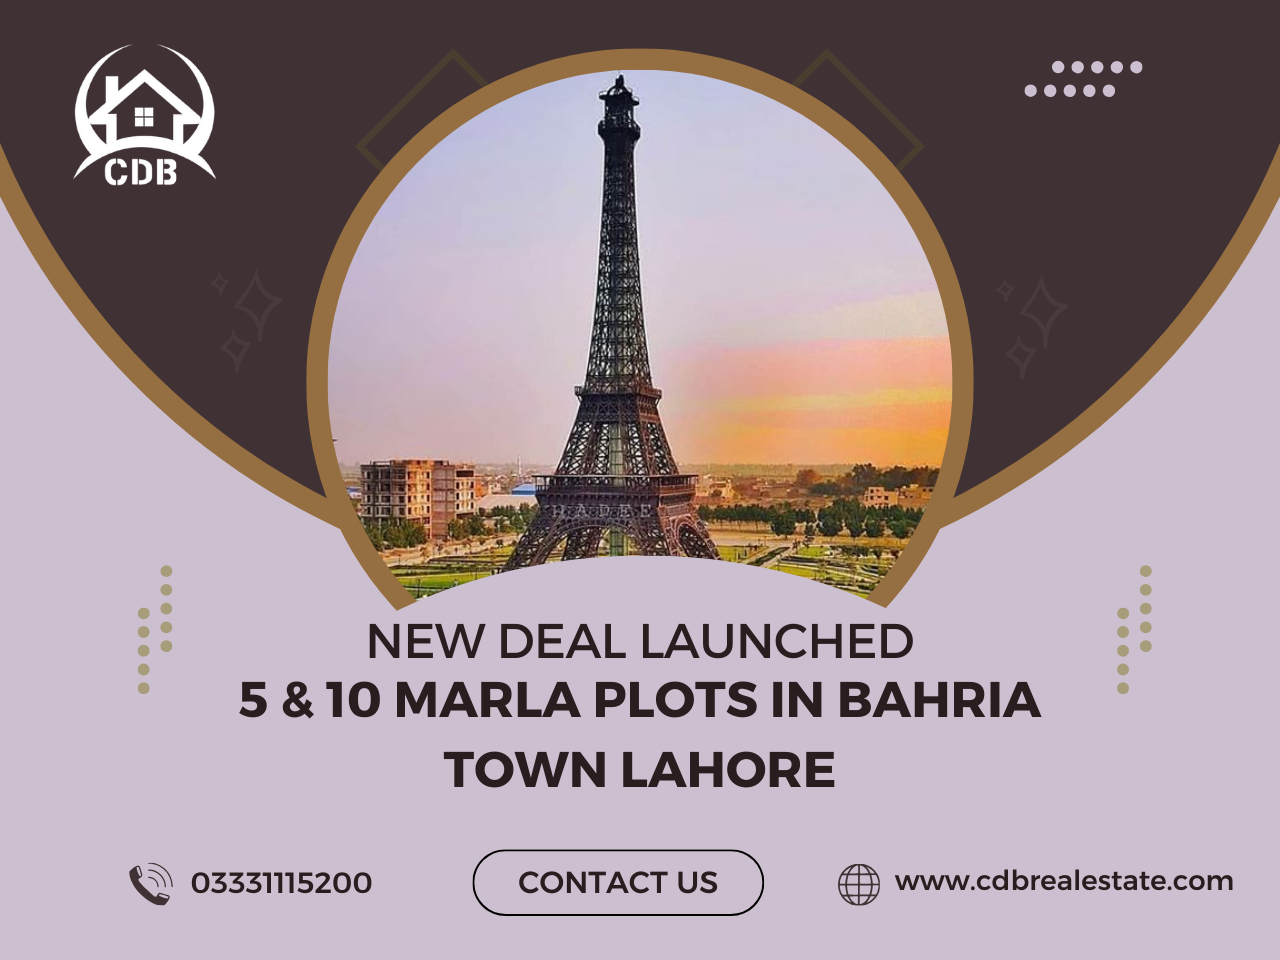 New Deal Launched: 5 & 10 Marla Plots in Bahria Town Lahore